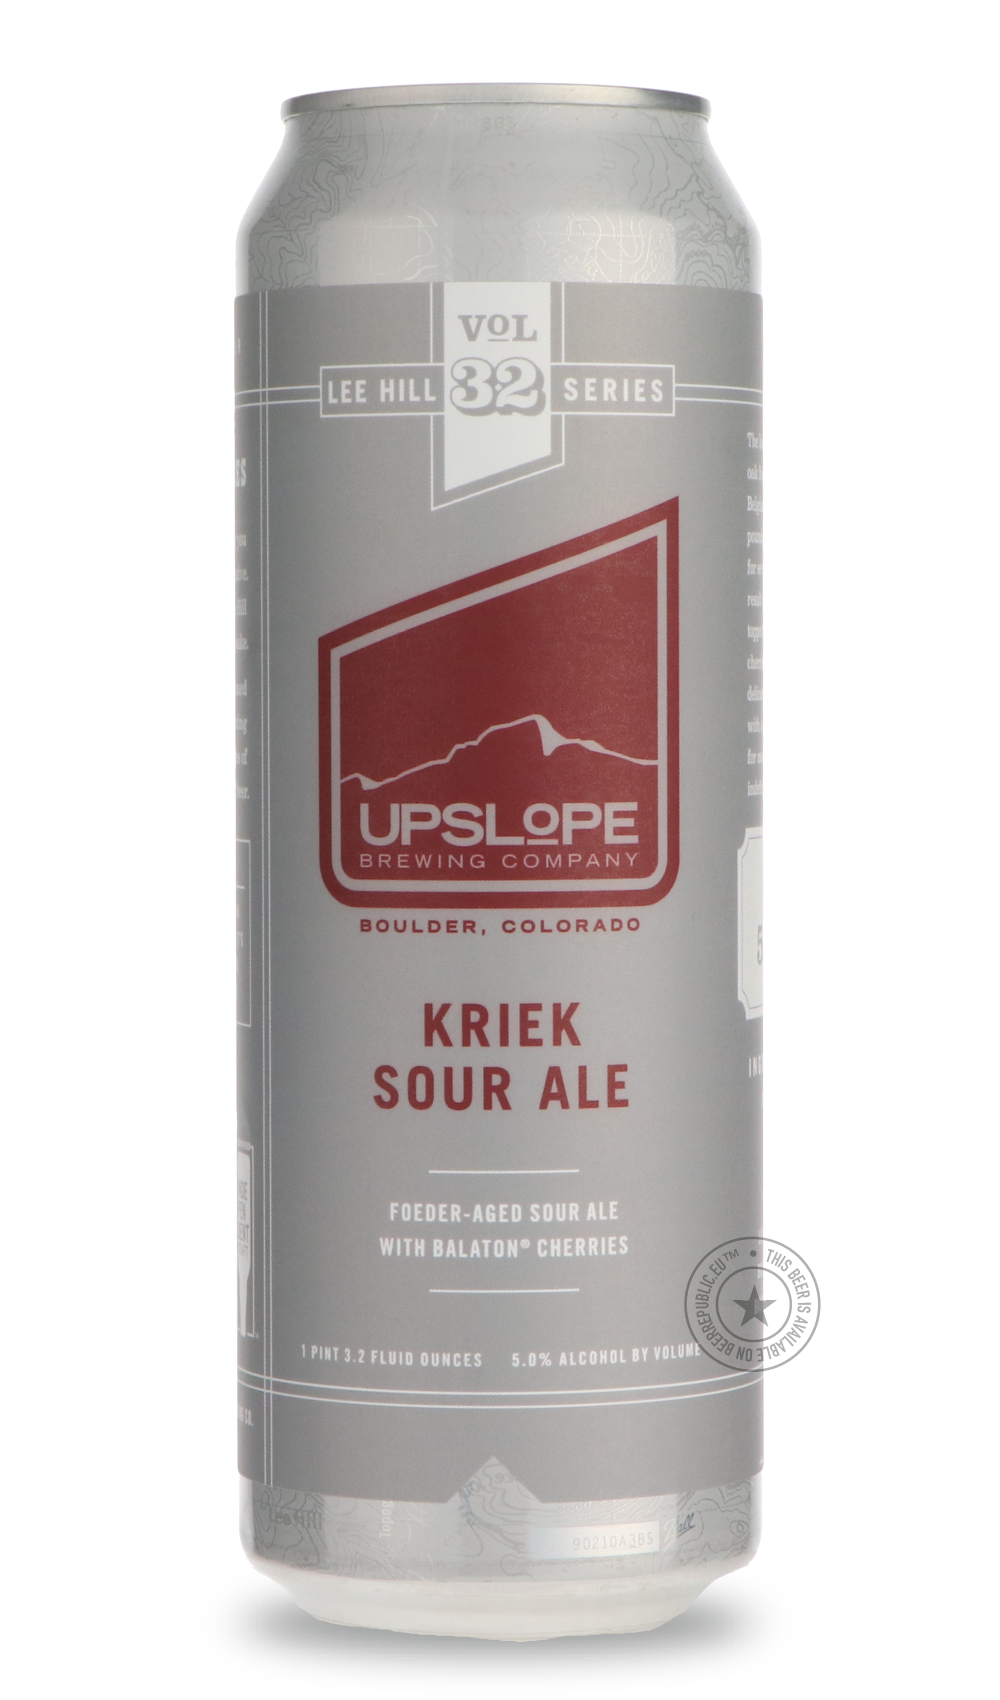 -Upslope- Lee Hill Series Vol. 32 - Kriek Sour Ale-Sour / Wild & Fruity- Only @ Beer Republic - The best online beer store for American & Canadian craft beer - Buy beer online from the USA and Canada - Bier online kopen - Amerikaans bier kopen - Craft beer store - Craft beer kopen - Amerikanisch bier kaufen - Bier online kaufen - Acheter biere online - IPA - Stout - Porter - New England IPA - Hazy IPA - Imperial Stout - Barrel Aged - Barrel Aged Imperial Stout - Brown - Dark beer - Blond - Blonde - Pilsner 